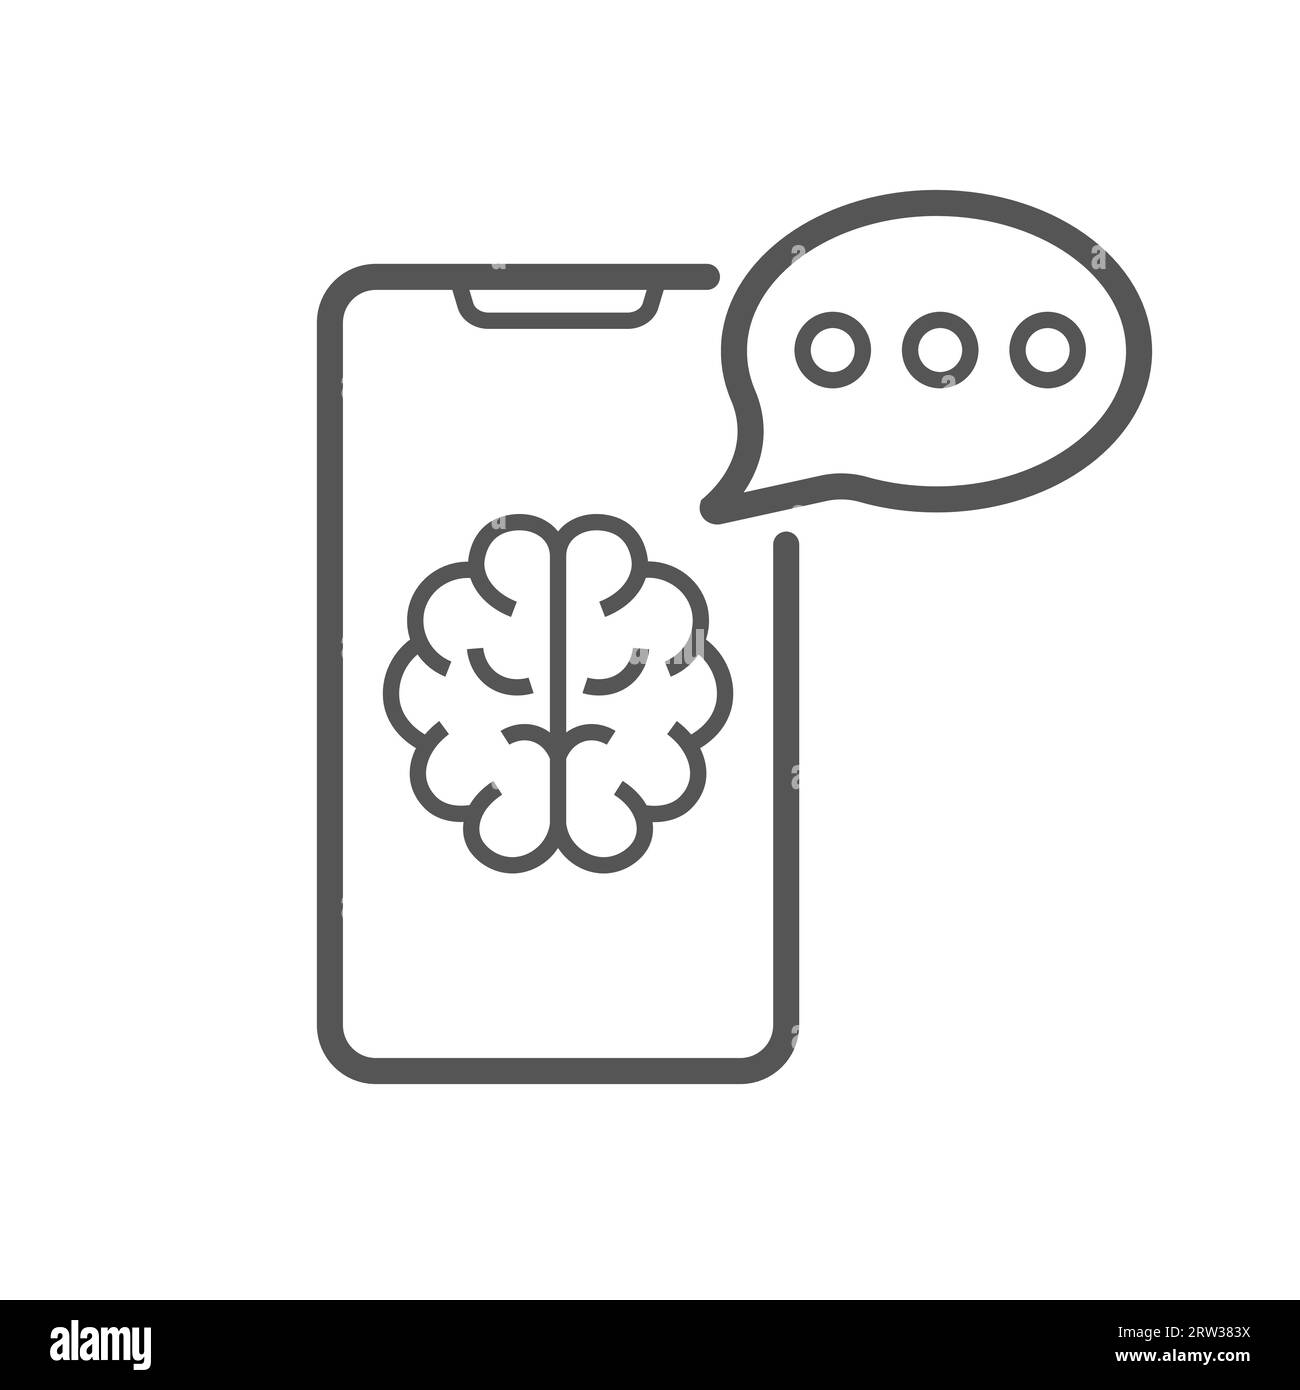 Smart Phone with AI and chat bot. Virtual Assistance in Smartphone. Flat Design Illustration of Virtual Assistant. Editable Stroke. EPS 10 Stock Vector